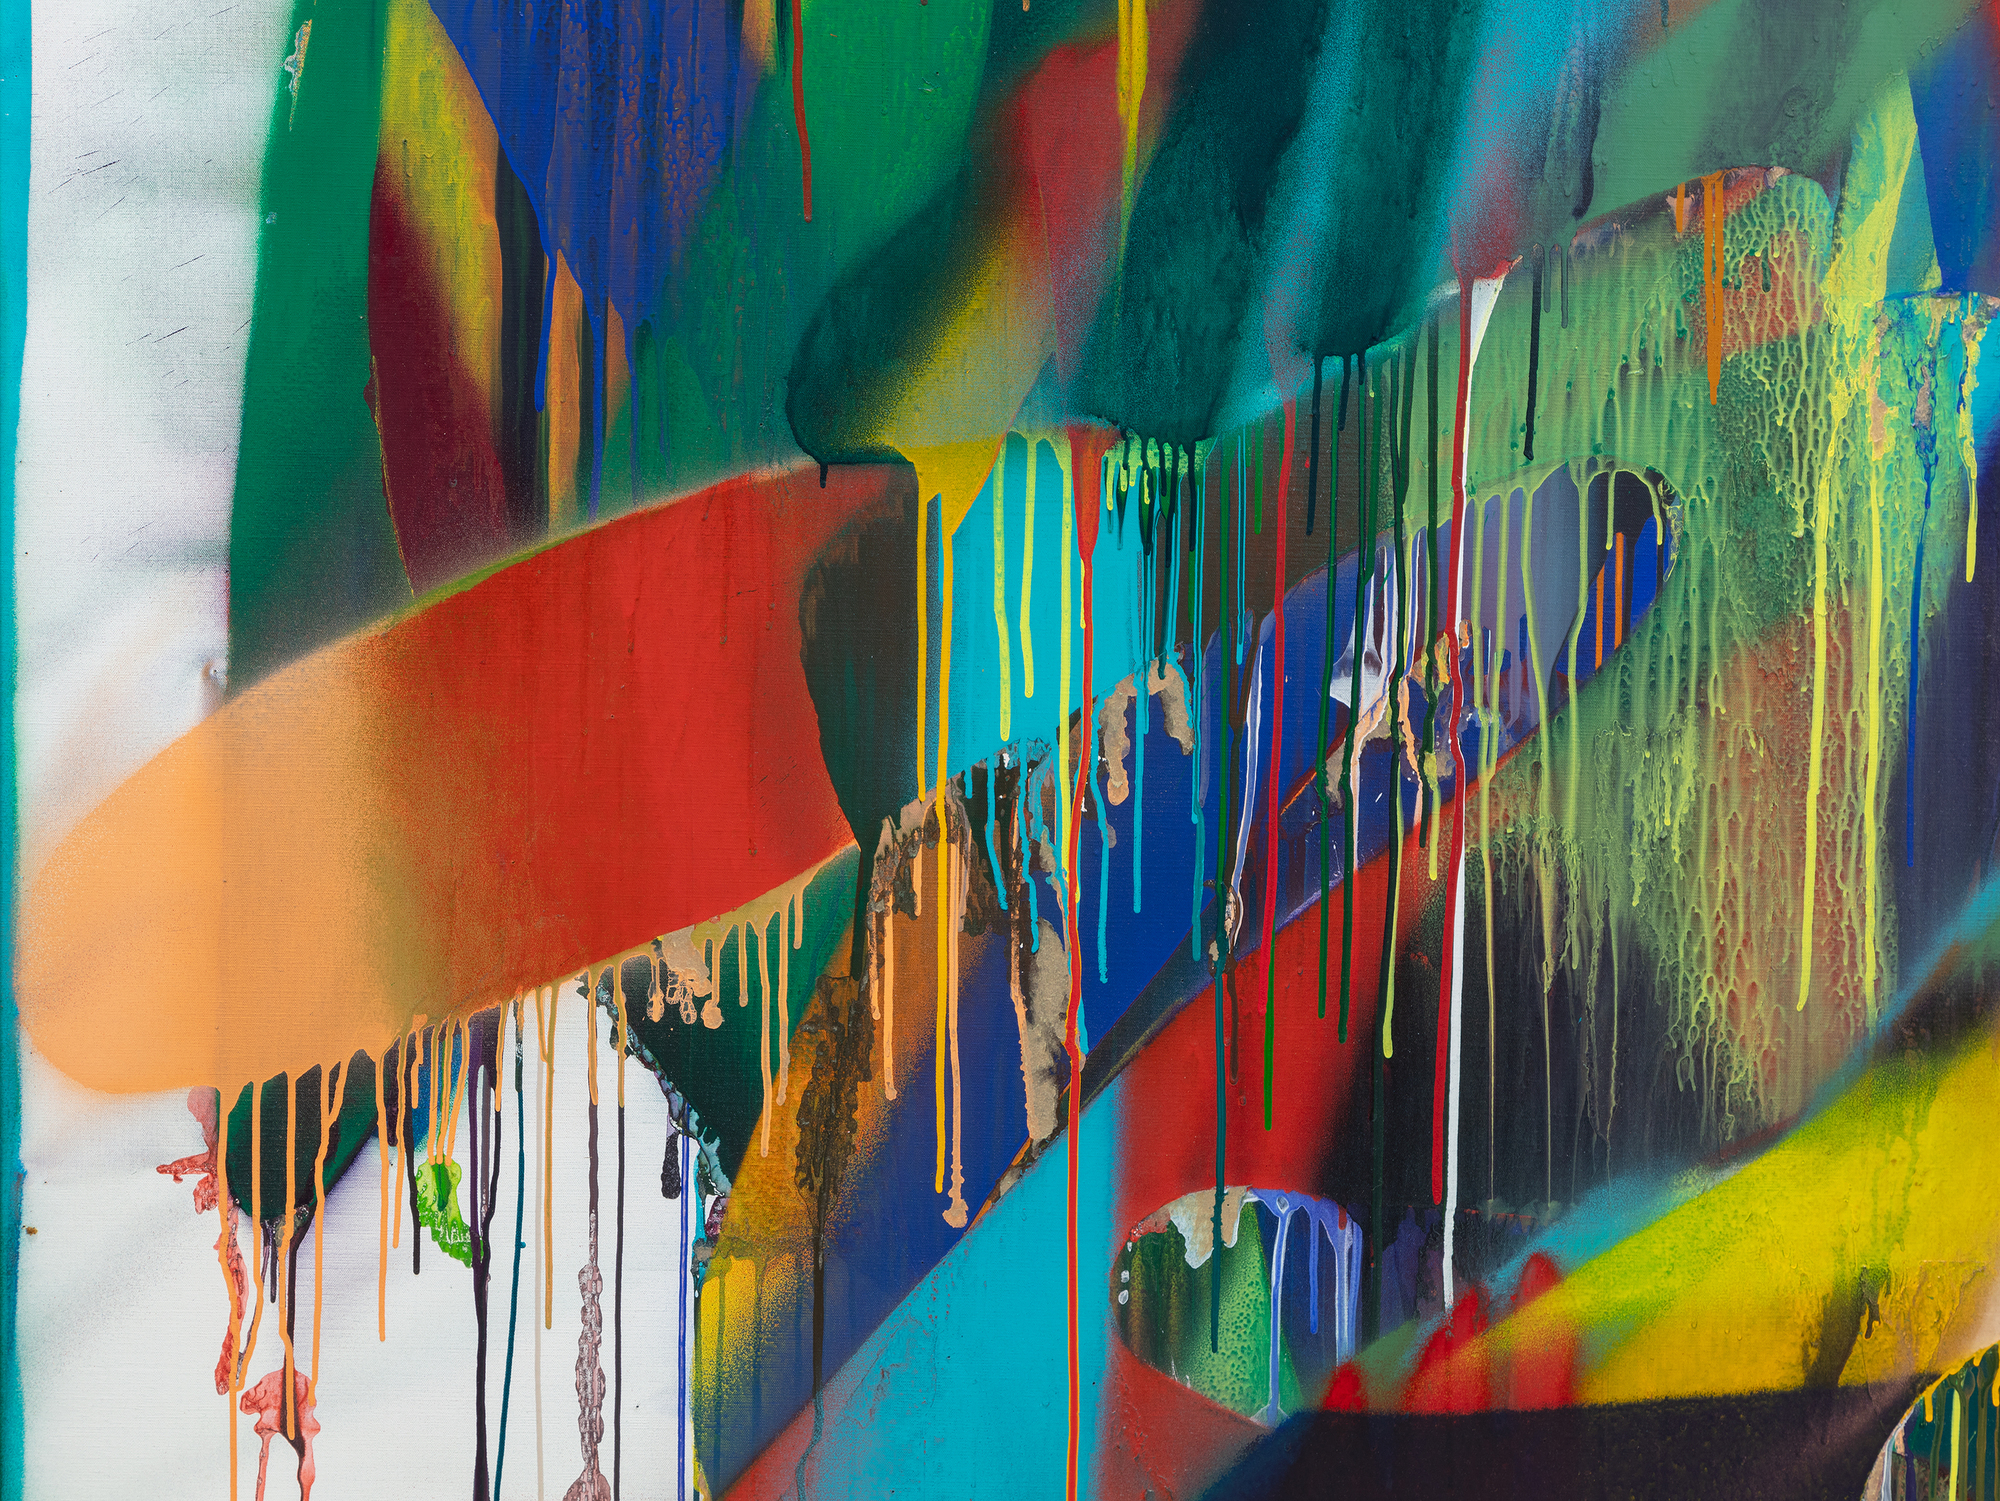 Katharine Grosse's Untitled of 2016 extends our appreciation of an artist who brings the same energy, boldness, and disregard for convention seen in her monumental architectural installations to the traditional medium of paint on canvas. The color explodes, lifted from a complex, richly layered surface of poured applications of paint that run, drizzle, or splatter, radiant transparent veils, and overlapping straps of color misted to create soft gradient transitions. The result is a fascinating impression of spatial depth and three-dimensionality. But it is also a tour de force that reveals Grosse's brilliance in blending chaos and control, spontaneity, and intention. Her range of techniques creates a compelling dialogue between the accidental and the deliberate, a hallmark of her unique style.